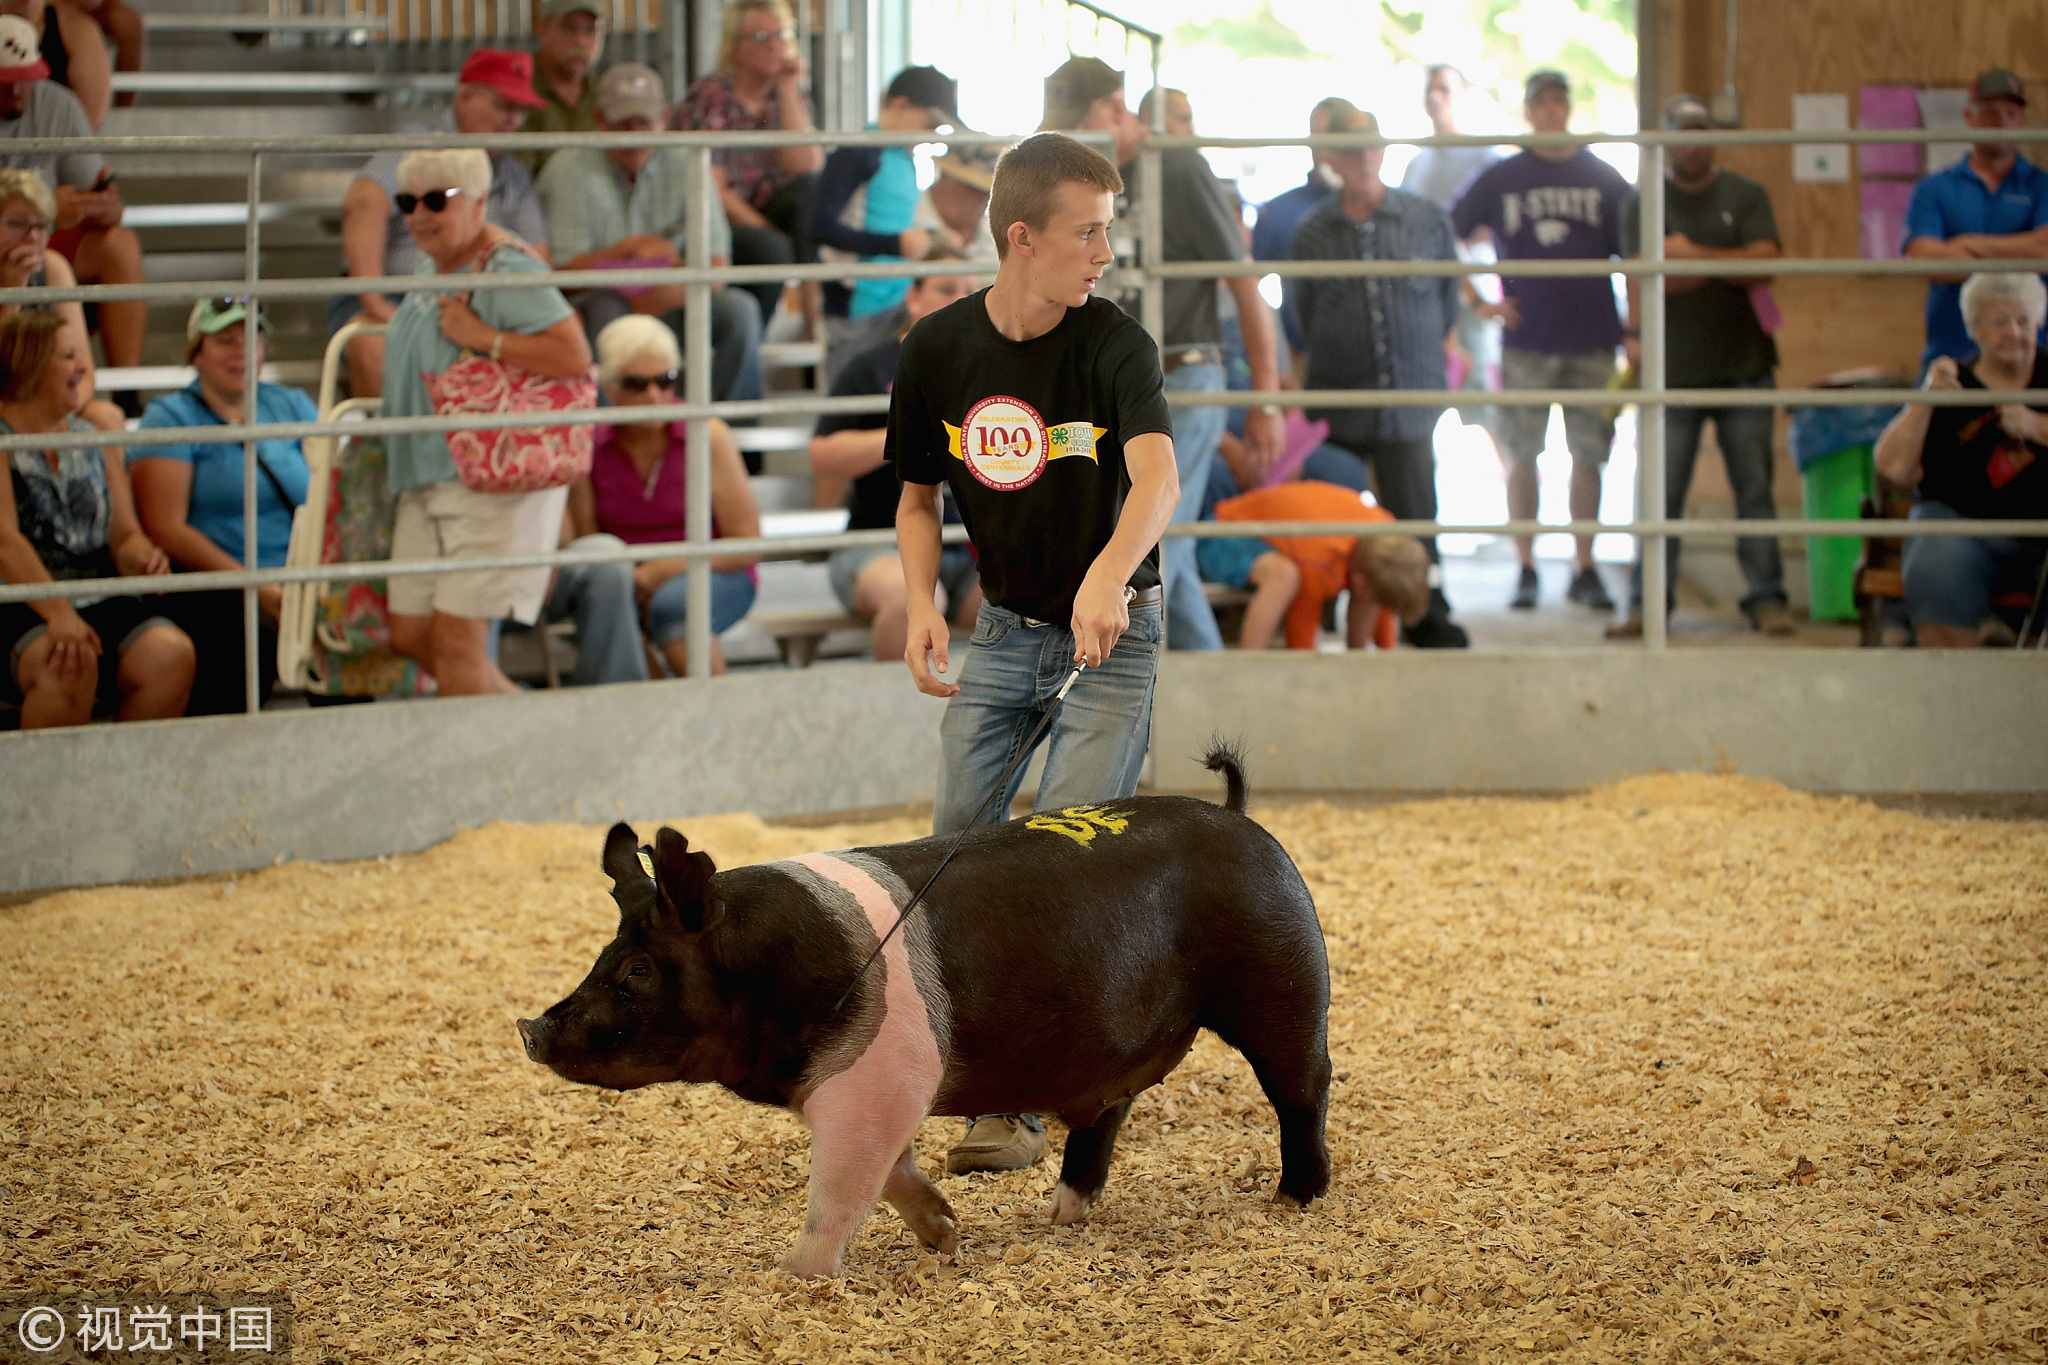 A contestant shows a hog during competition at the Iowa County Fair on July 13, 2018 in Marengo, Iowa. Farmers in Iowa and the rest of the country, who are already faced with decade-low profits, are bracing for the impact a trade war with China may have on their bottom line going forward. [Photo: VCG]